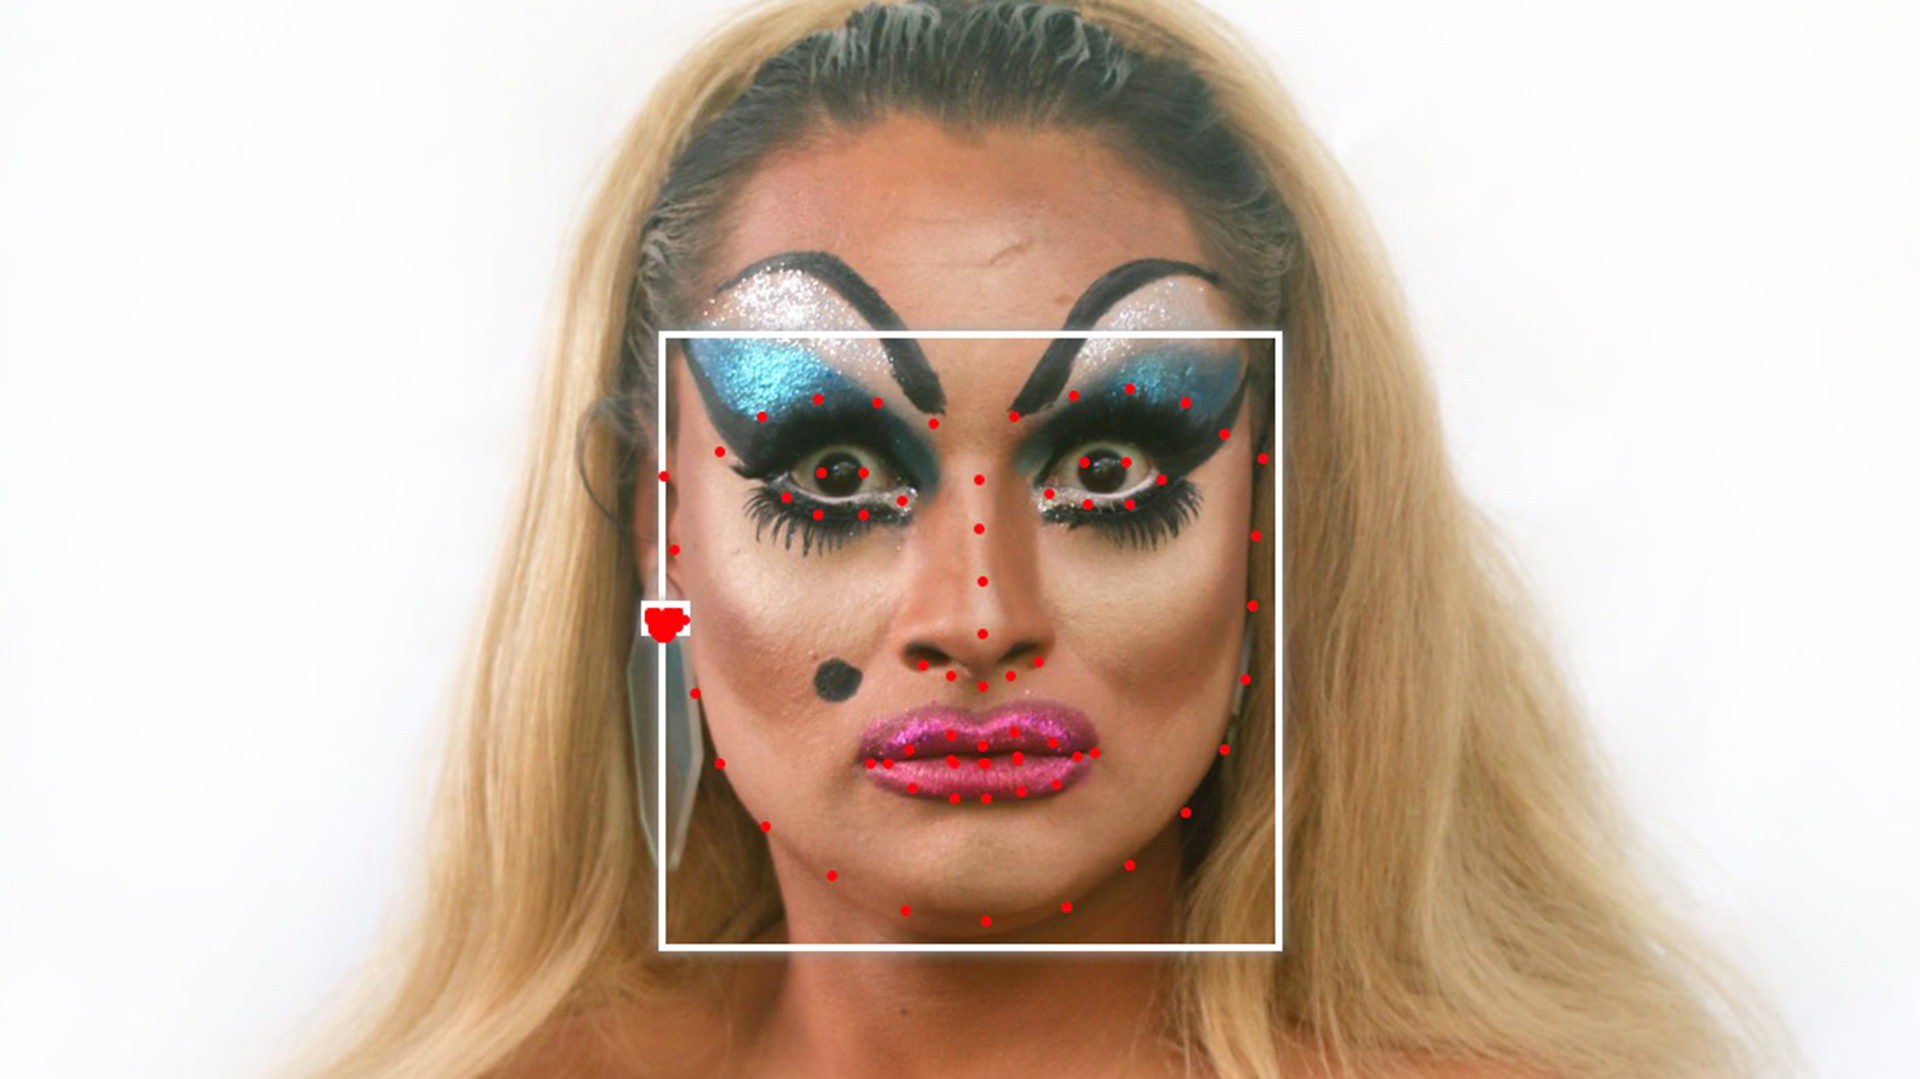 A white person with long, blonde hair, blue eyeshadow and pink lipstick with a white square framing their face with red facial recognition dots.